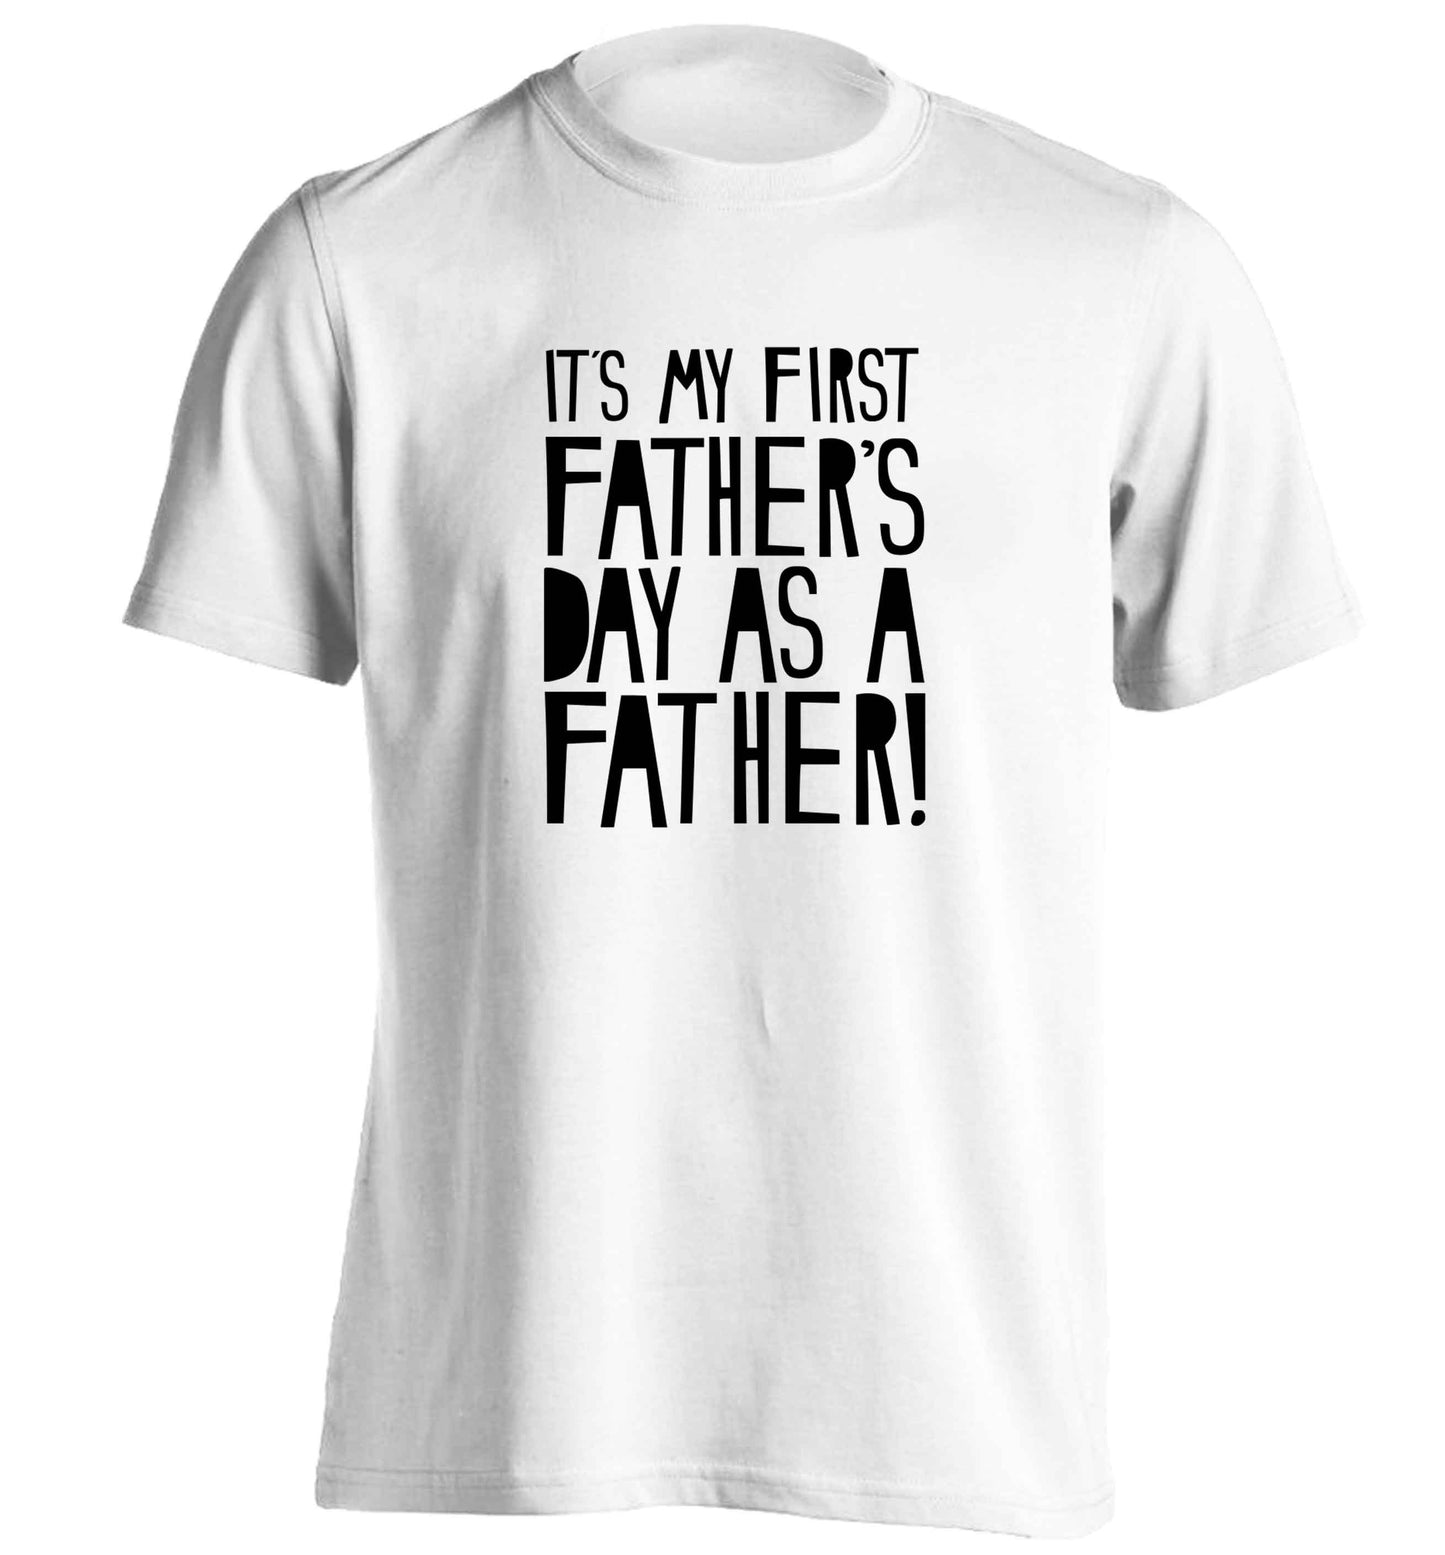 It's my first father's day as a father! adults unisex white Tshirt 2XL